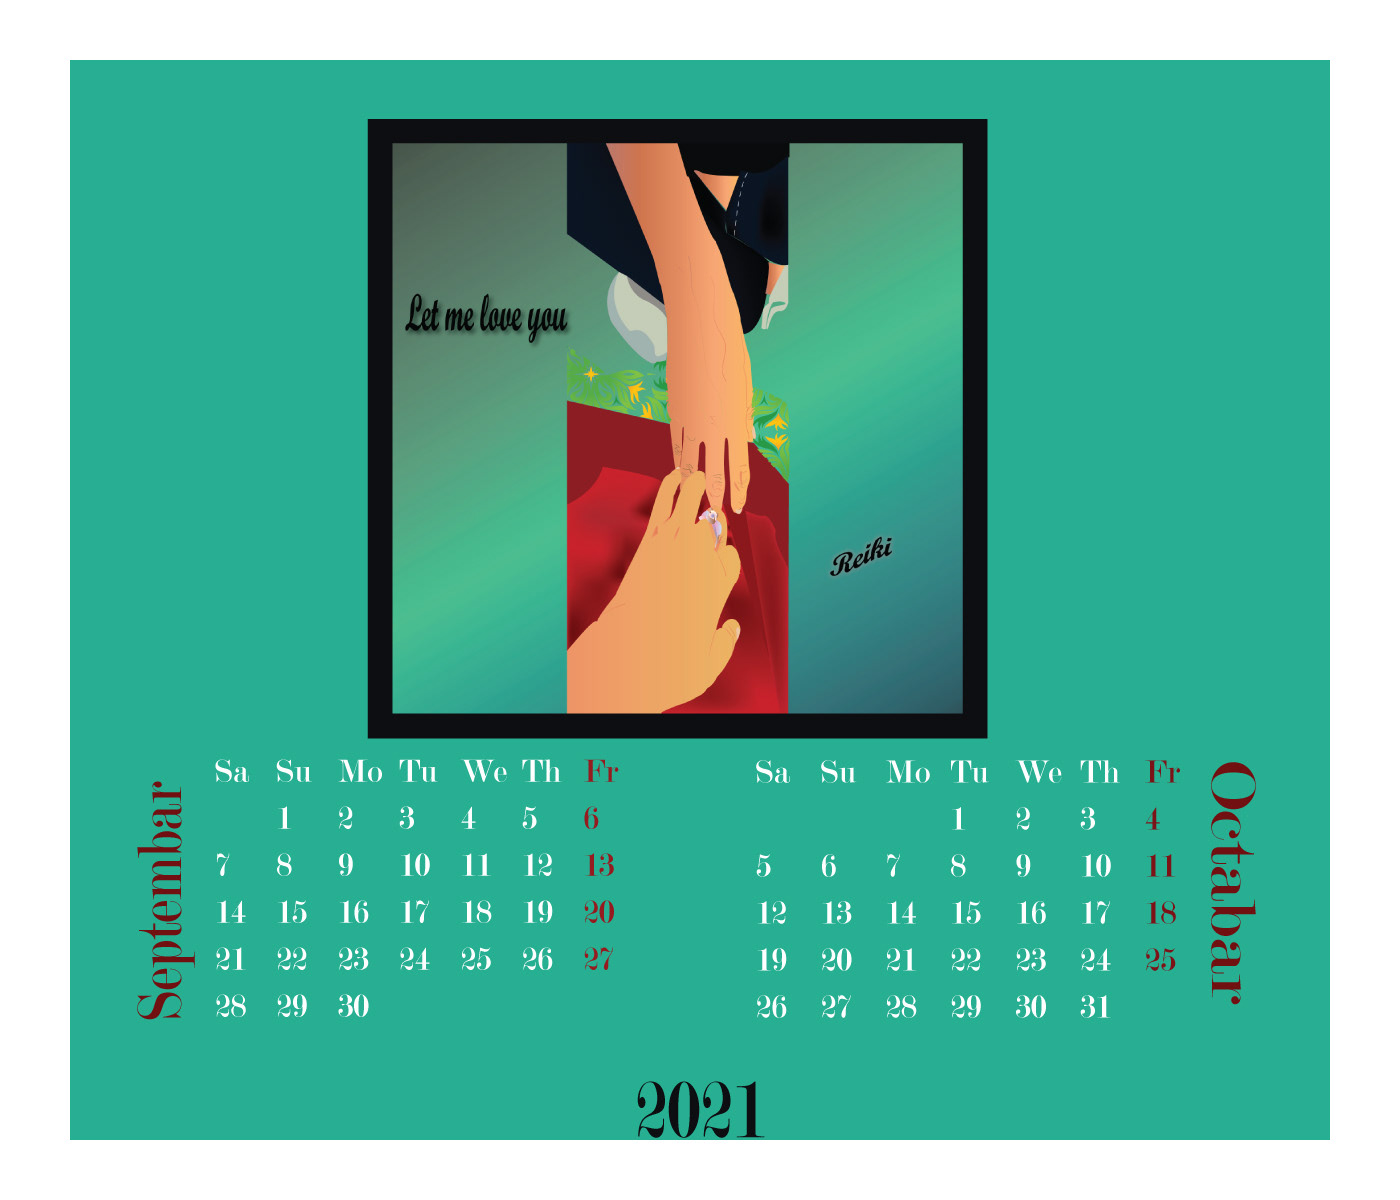 #2021 #calendar #colorful #date #Dhaka #illustration #relaxing #satisfied